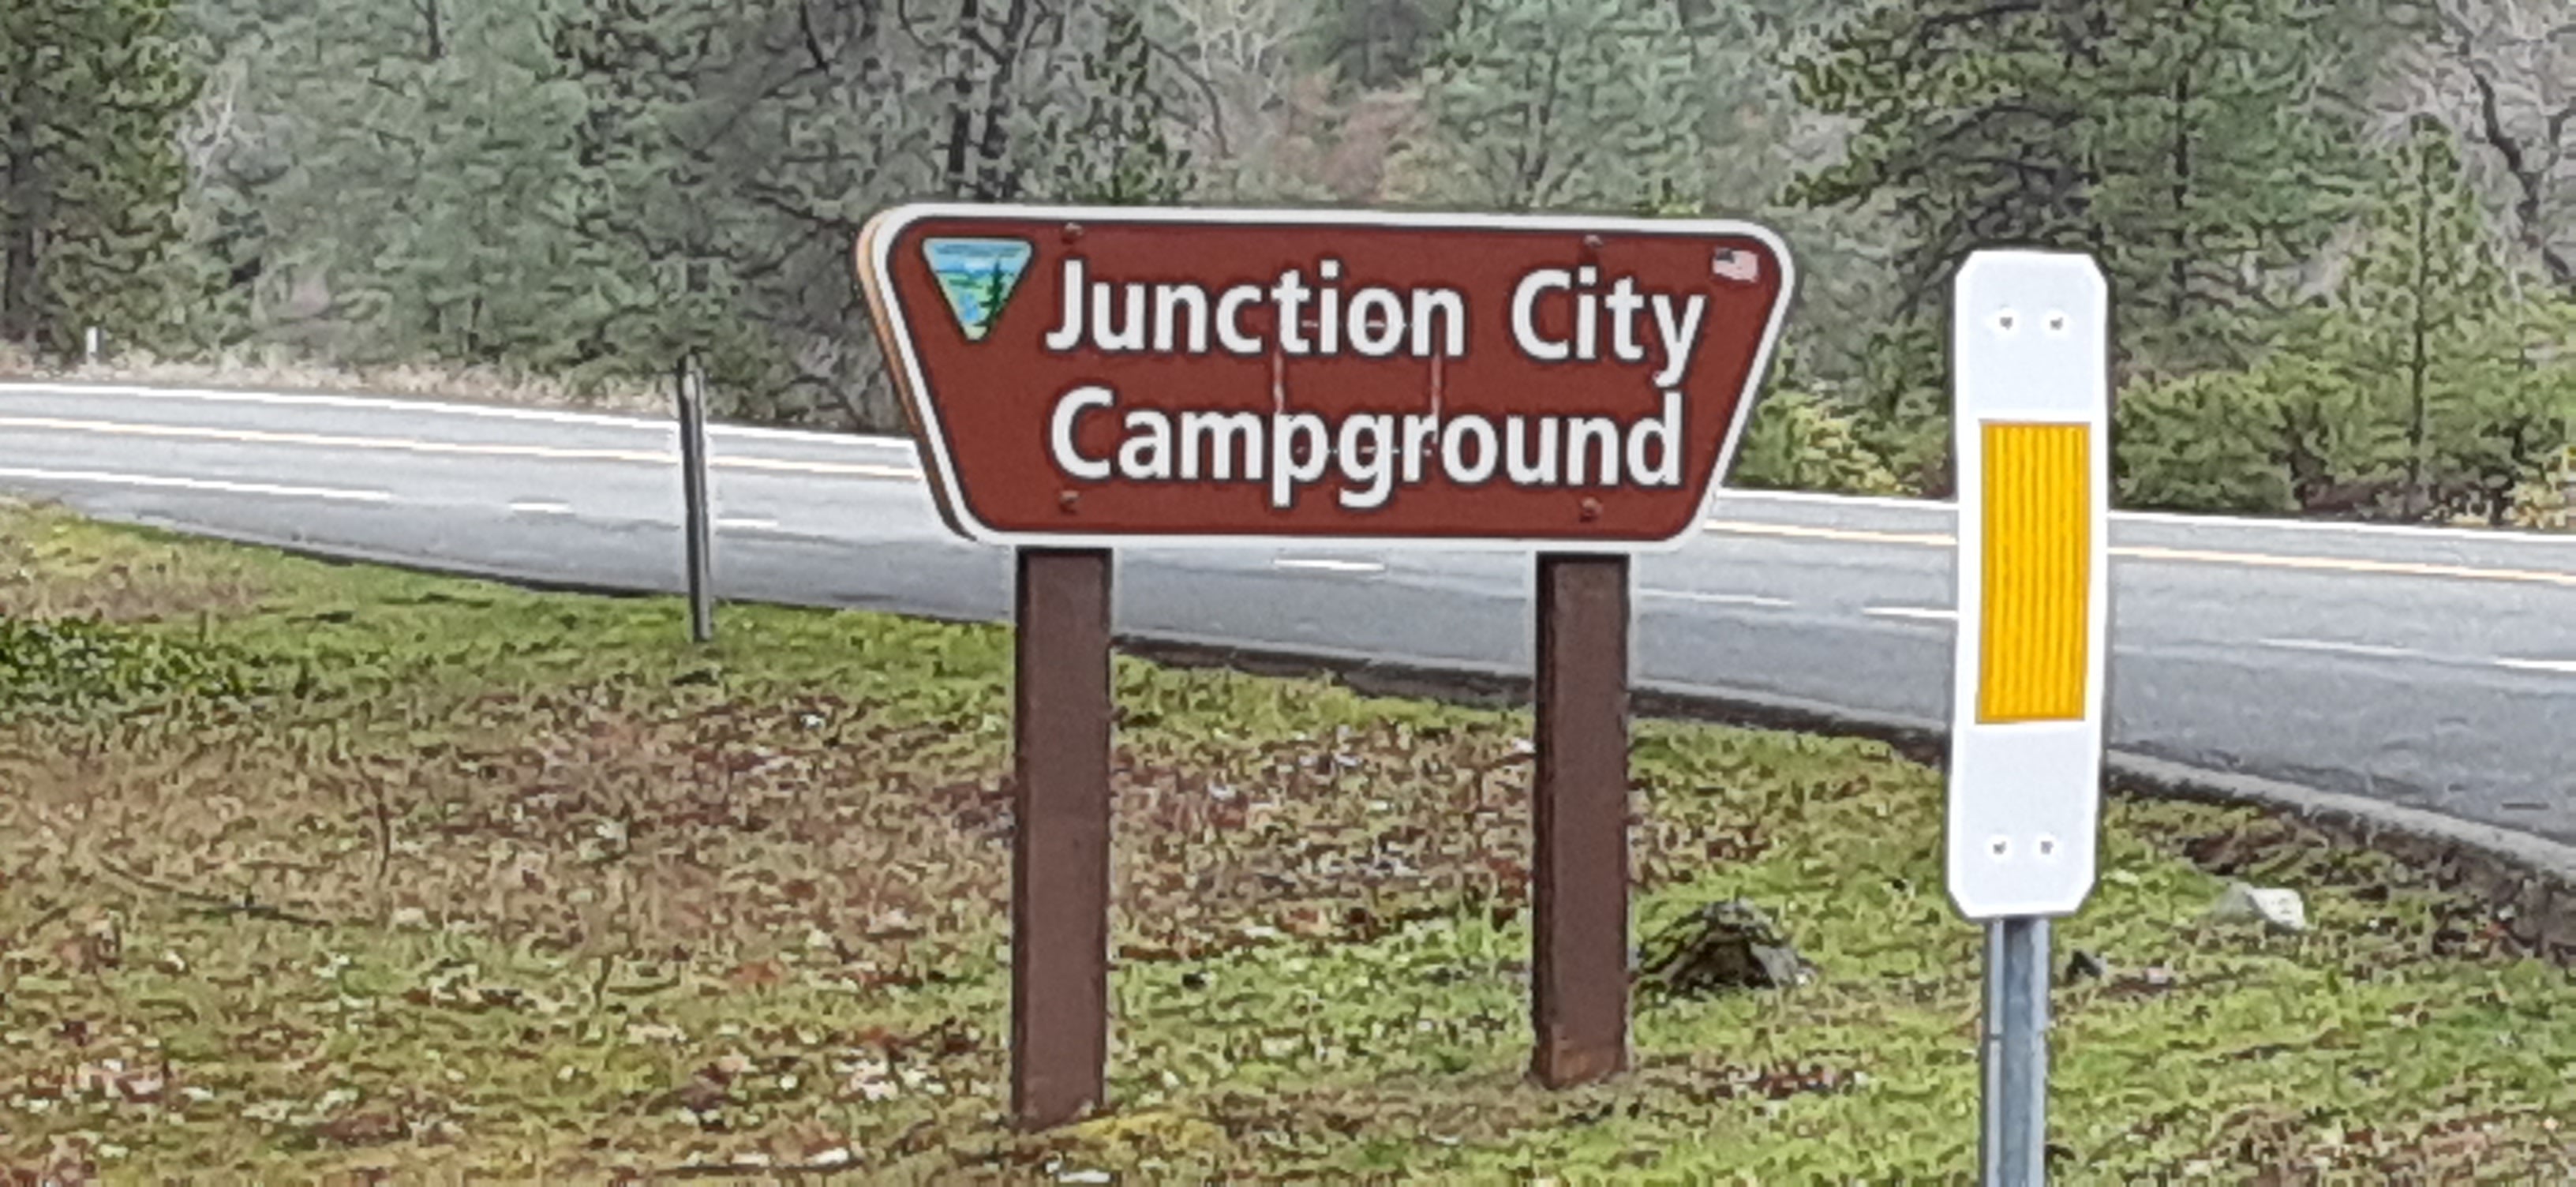 Camper submitted image from Junction City Campground - 2